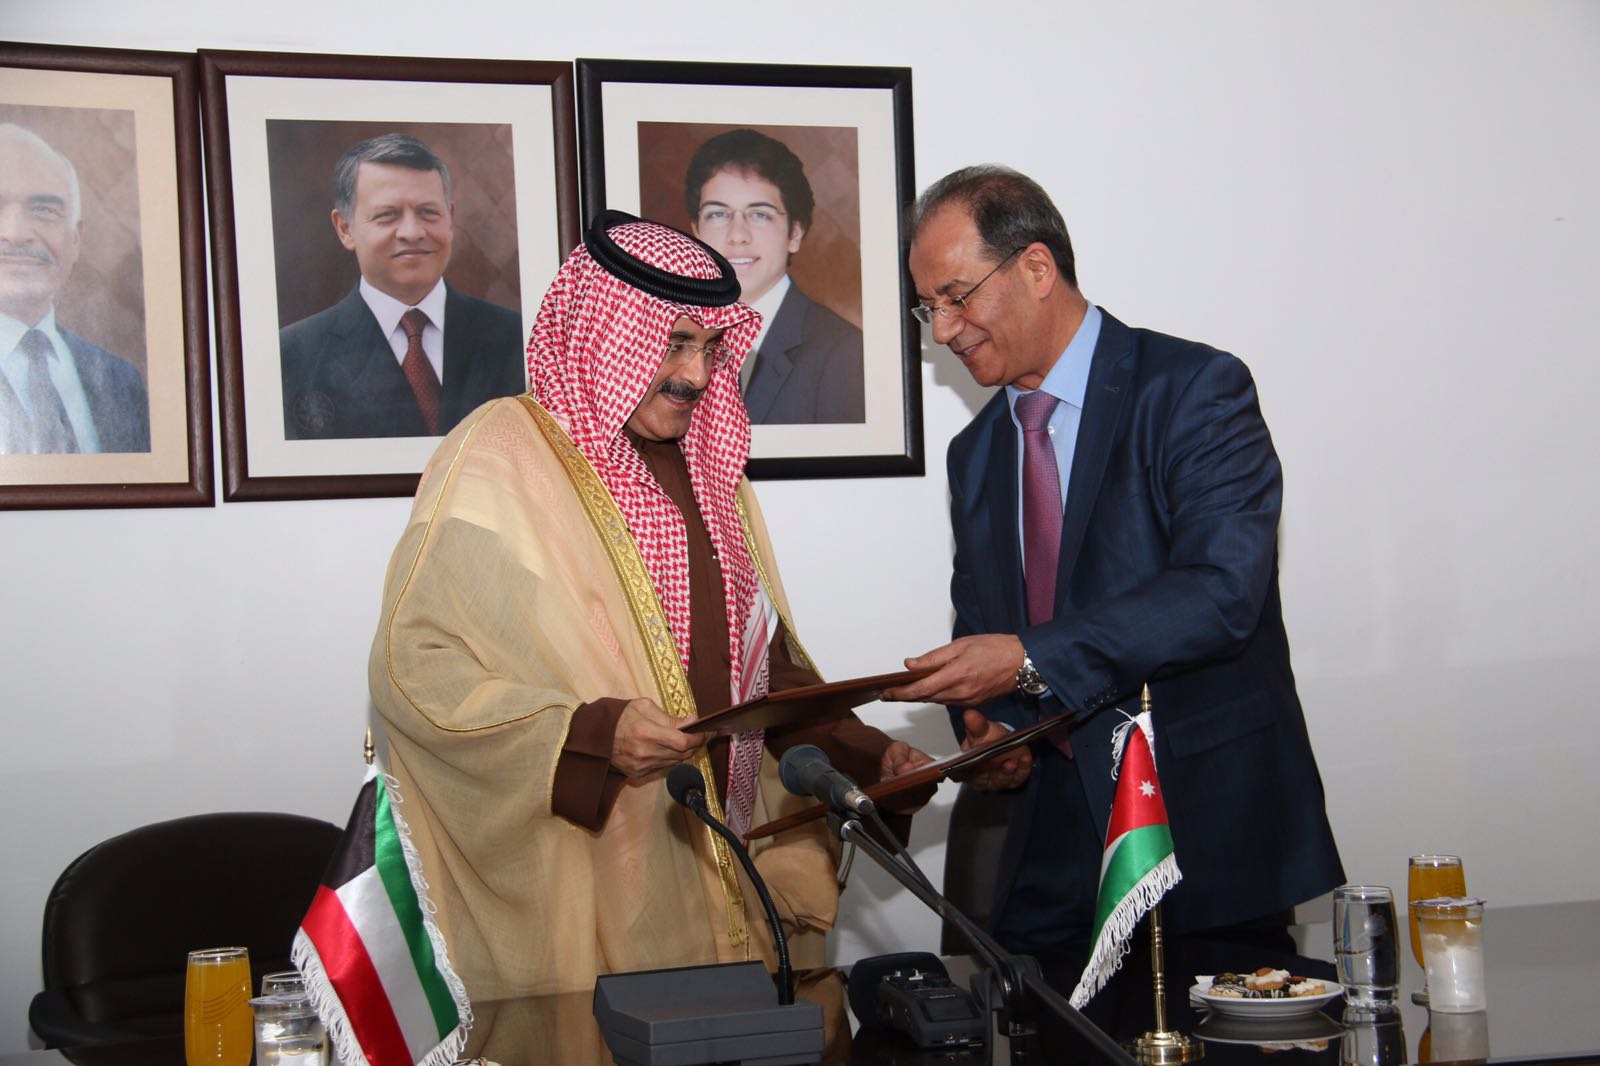 President of the Federation of Arab News Agencies, Chairman and Director General of KUNA Sheikh Mubarak Al-Duaij Al-Sabah and Petra's Director General Faisal Shboul during the signing ceremony